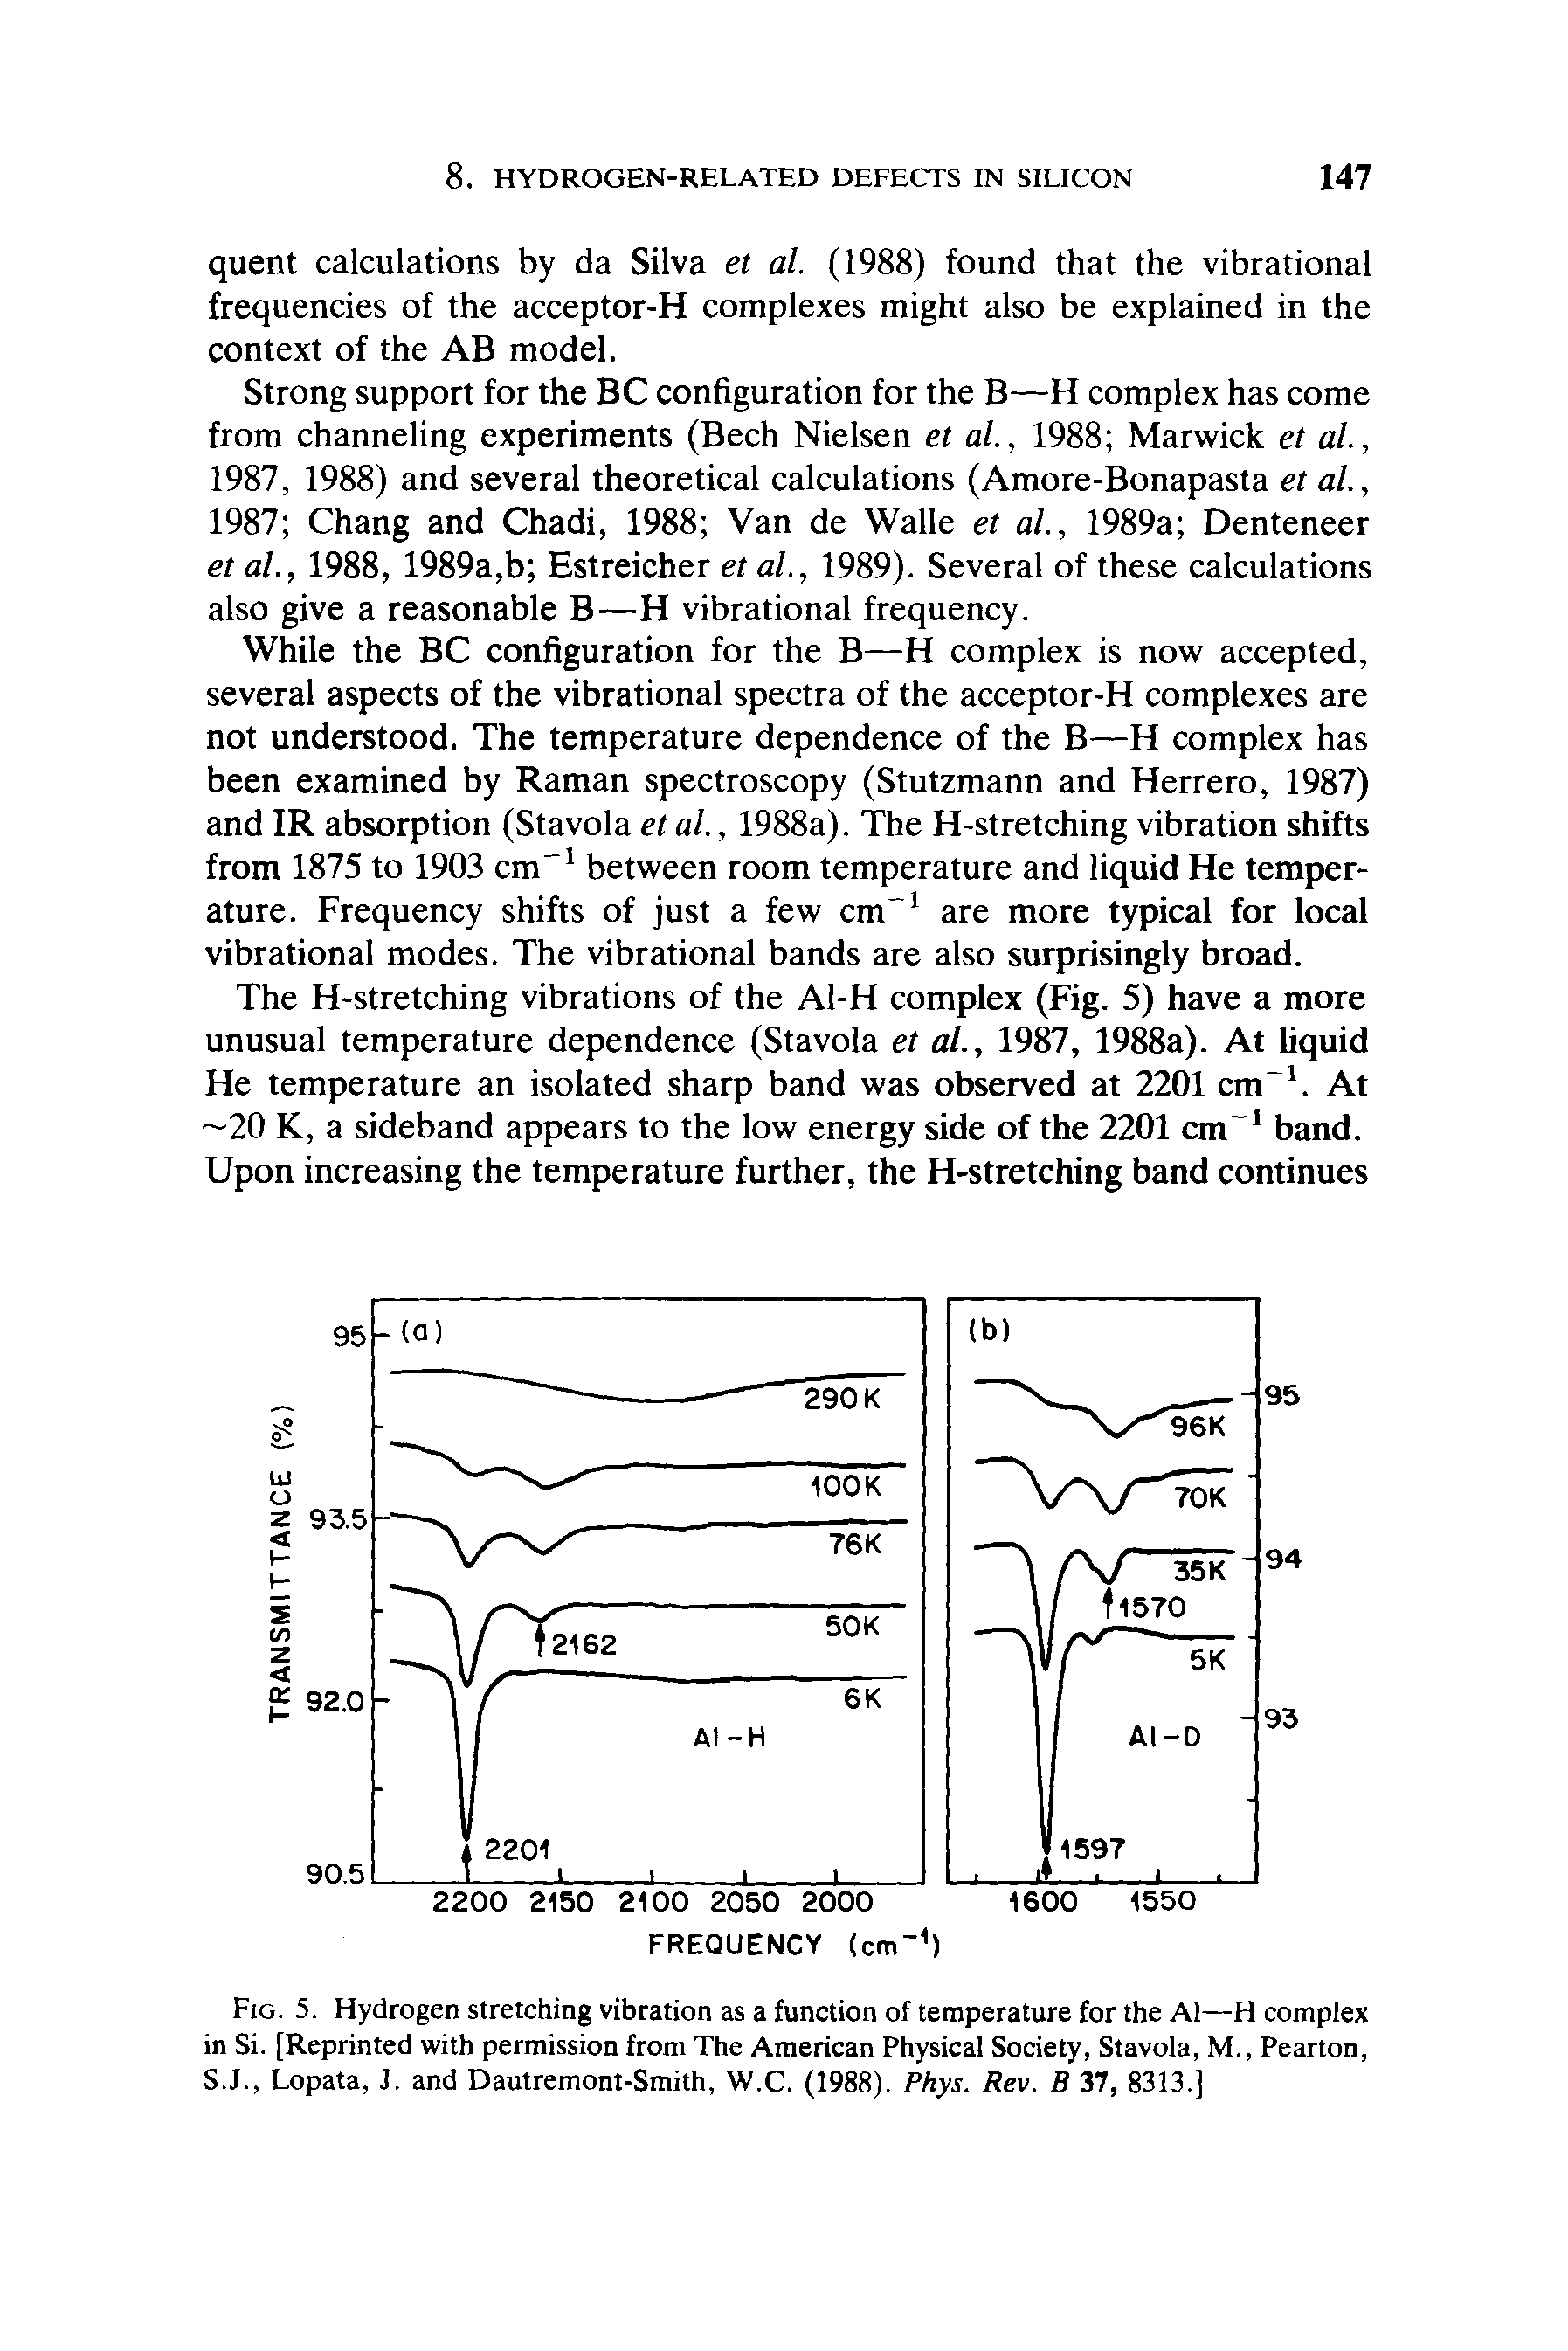 Fig. 5. Hydrogen stretching vibration as a function of temperature for the Al—H complex in Si. [Reprinted with permission from The American Physical Society, Stavola, M., Pearton, S.J., Lopata, J. and Dautremont-Smith, W.C. (1988). Phys. Rev. B 37, 8313.]...